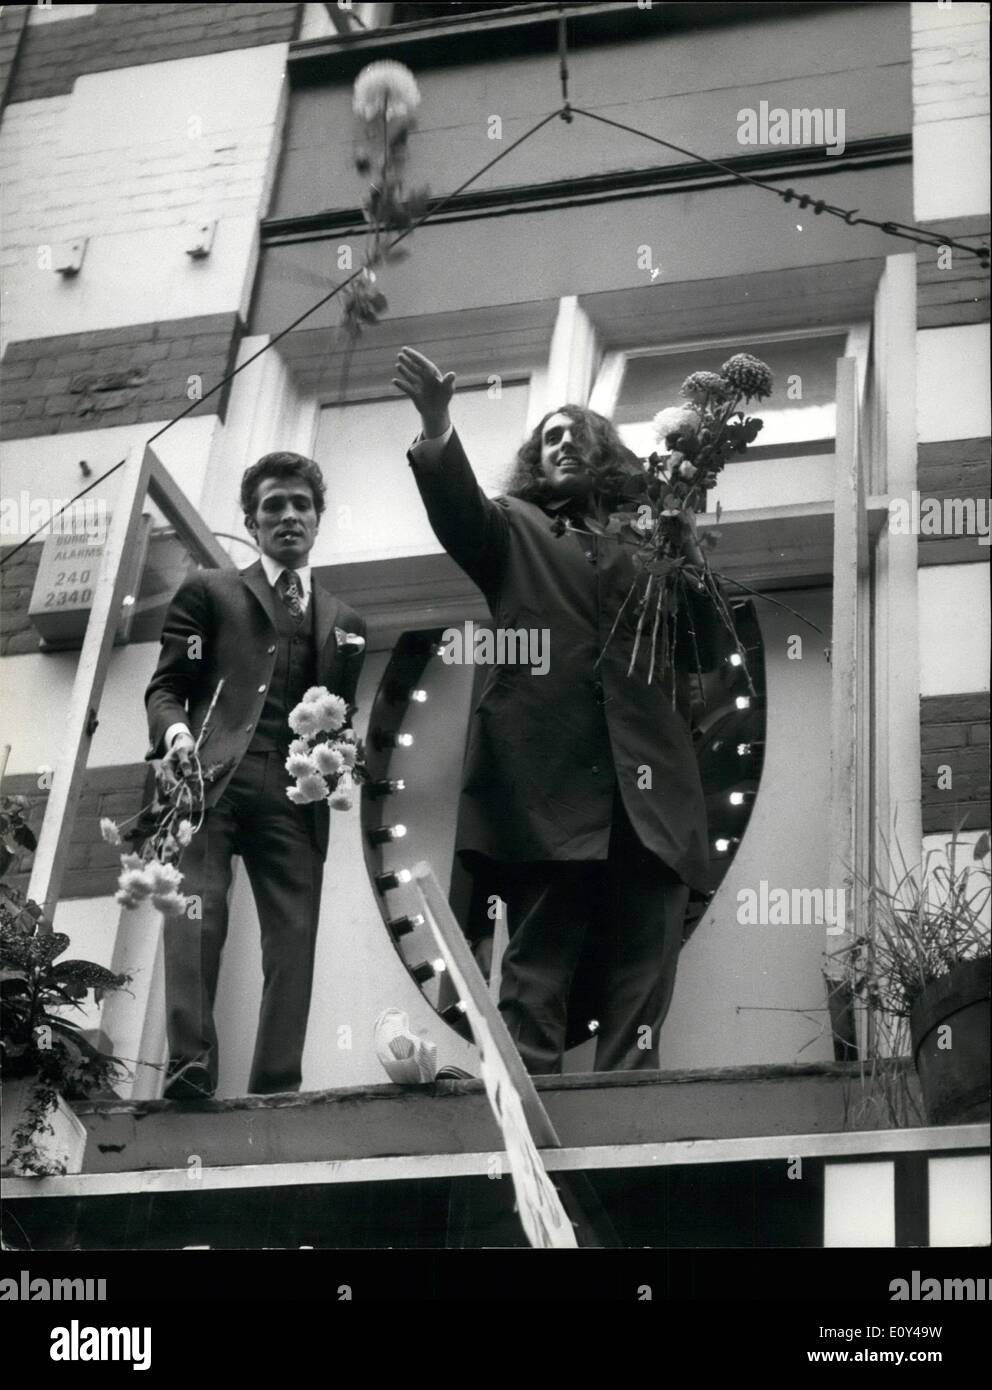 Oct. 10, 1968 - Tiny Tim - The six foot plus American Pop star visits London's famous Carnaby Strip: Tiny Tim, the six foot plus American Pop star who sings like a choir boy, has arrived In London for several engagements. He is ready to be earning 500,000 dollars a year in U.S Tiny Tim admits he wears make up During Show time, powders his skin fifteen time and takes showers all through the day. Photo shows Tiny Tim throws flowers from the balcony of John Stey's Drug Store when he Paid It to London's a famous Carnaby today. Stock Photo